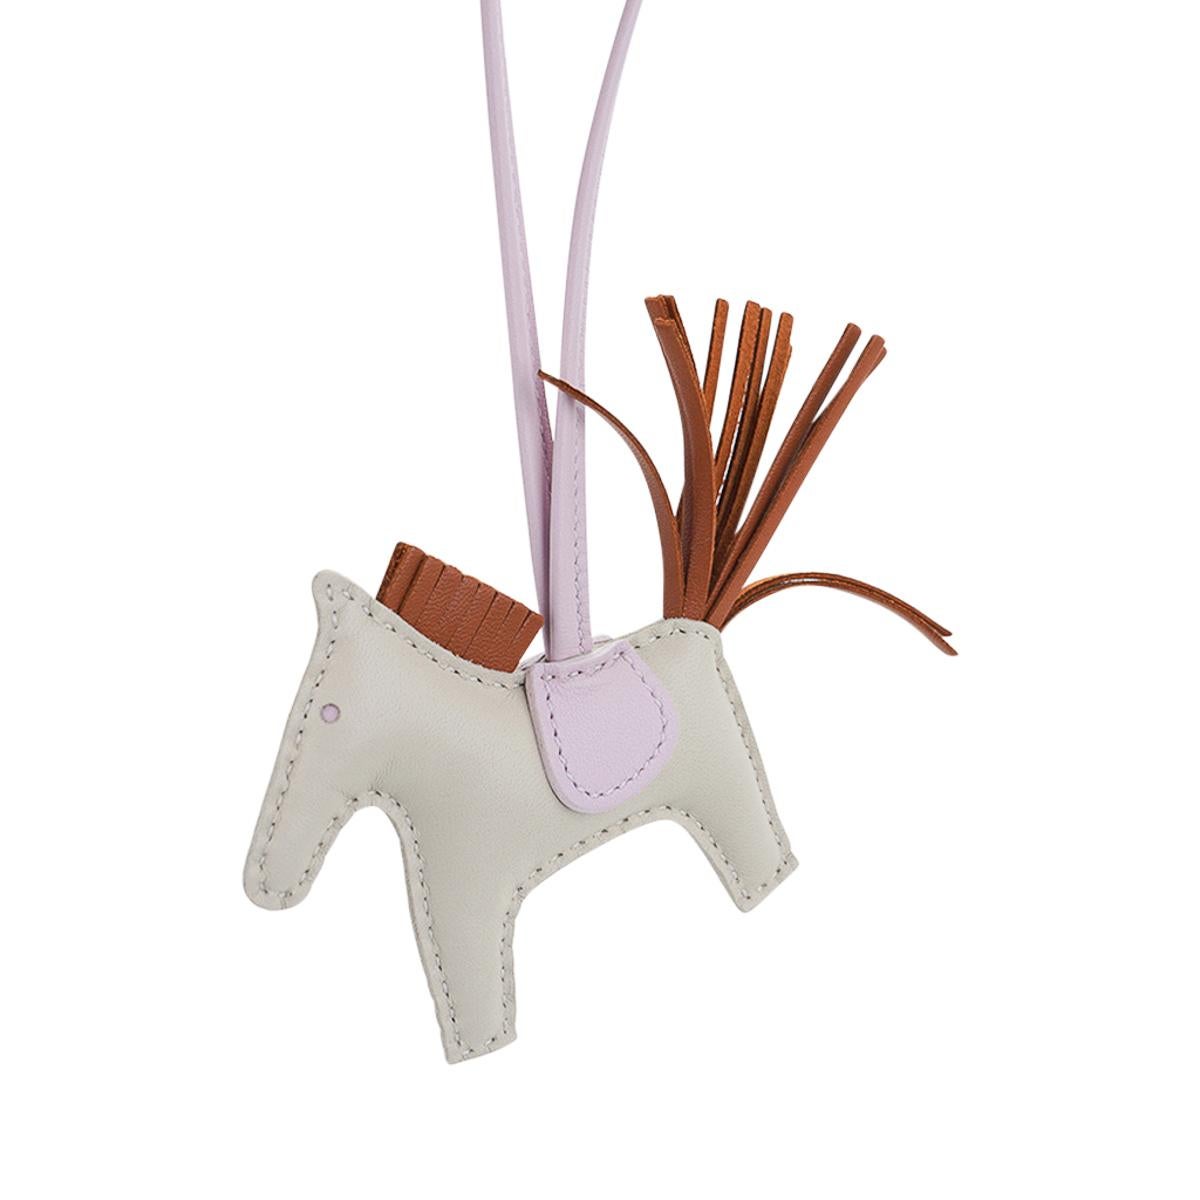 Mightychic offers an Hermes PM Rodeo bag charm featured in Craie, Mauve Pale and Gold.
Charming and playful she easily adorns a myriad bag colours in your fabulous collection.
Skin is Milo lambskin.
Signature HERMES PARIS MADE IN FRANCE is stamped